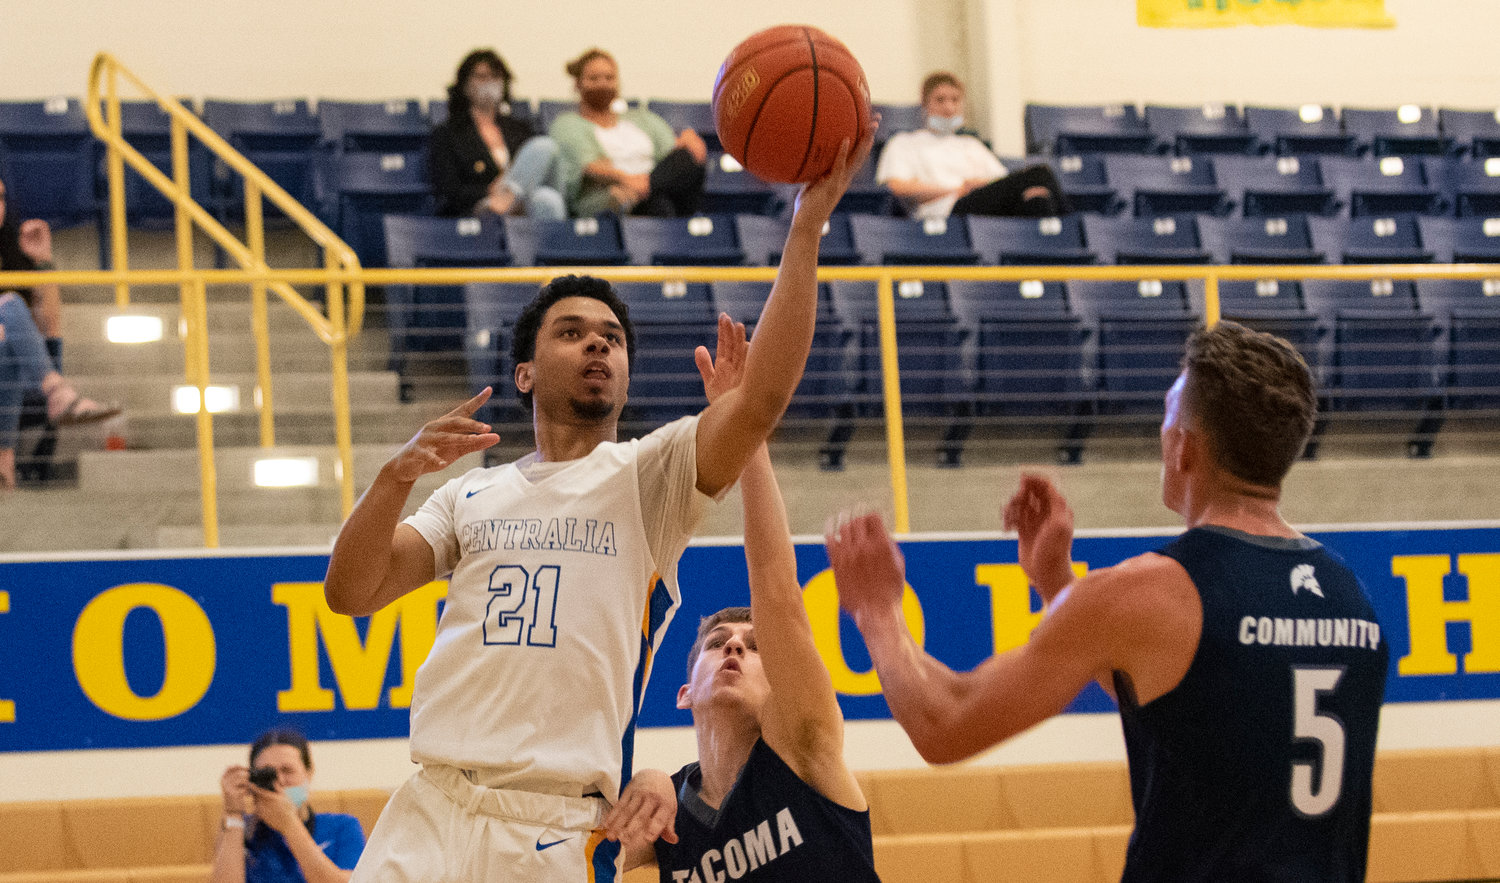 Centralia College's Wendell Davis Jr. (21) rises for a layup against Tacoma.